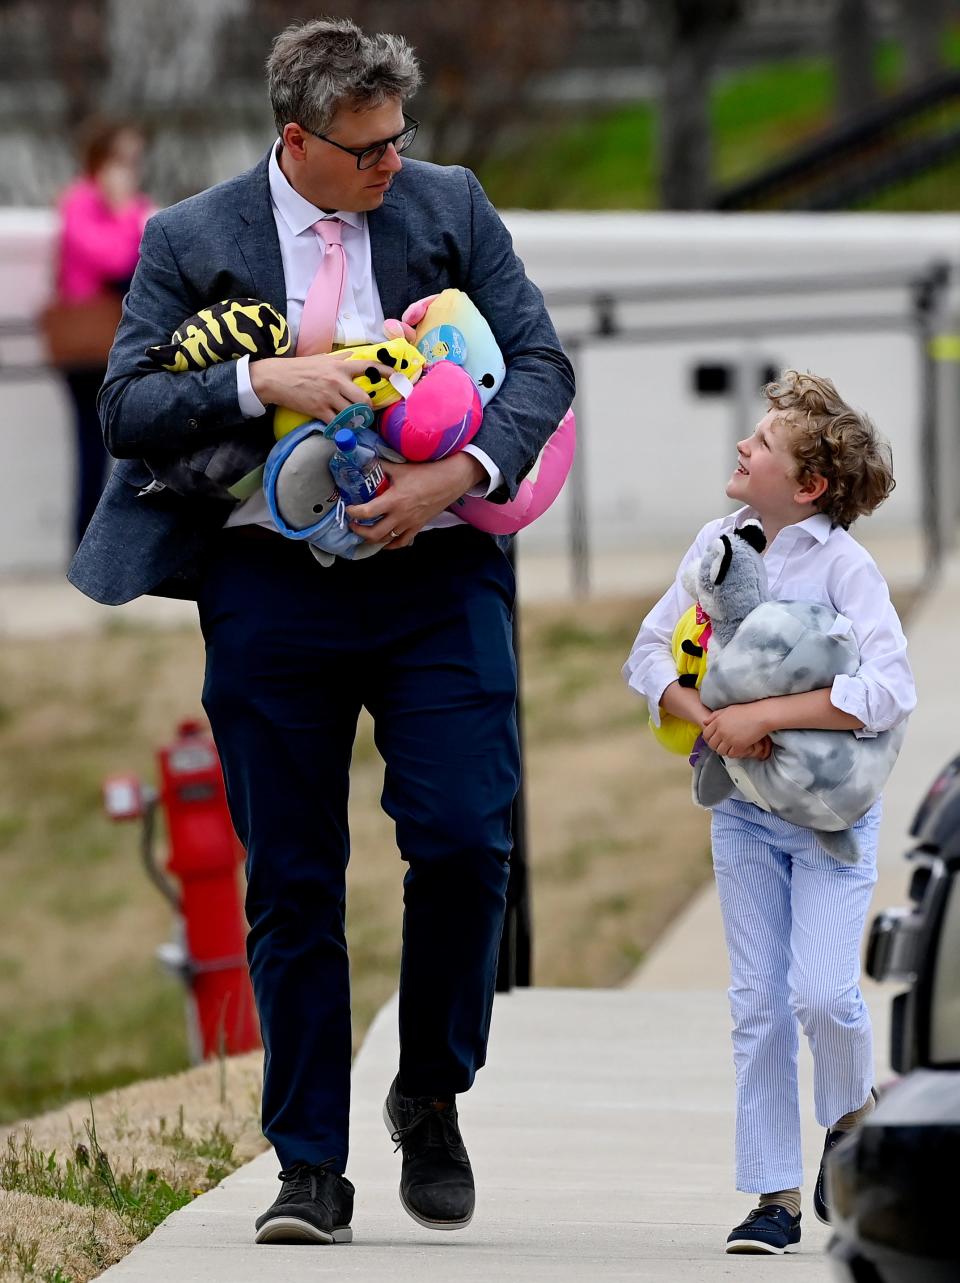 Friends of the family leave after the funeral of Covenant School student Evelyn Dieckhaus, 9, at the Woodmont Christian Church Friday, March 31, 2023, in Nashville, Tenn. Stuffed animals were given out to families and children during the service. Dieckhaus was one of six students and adults killed in a mass shooting at the school Monday.